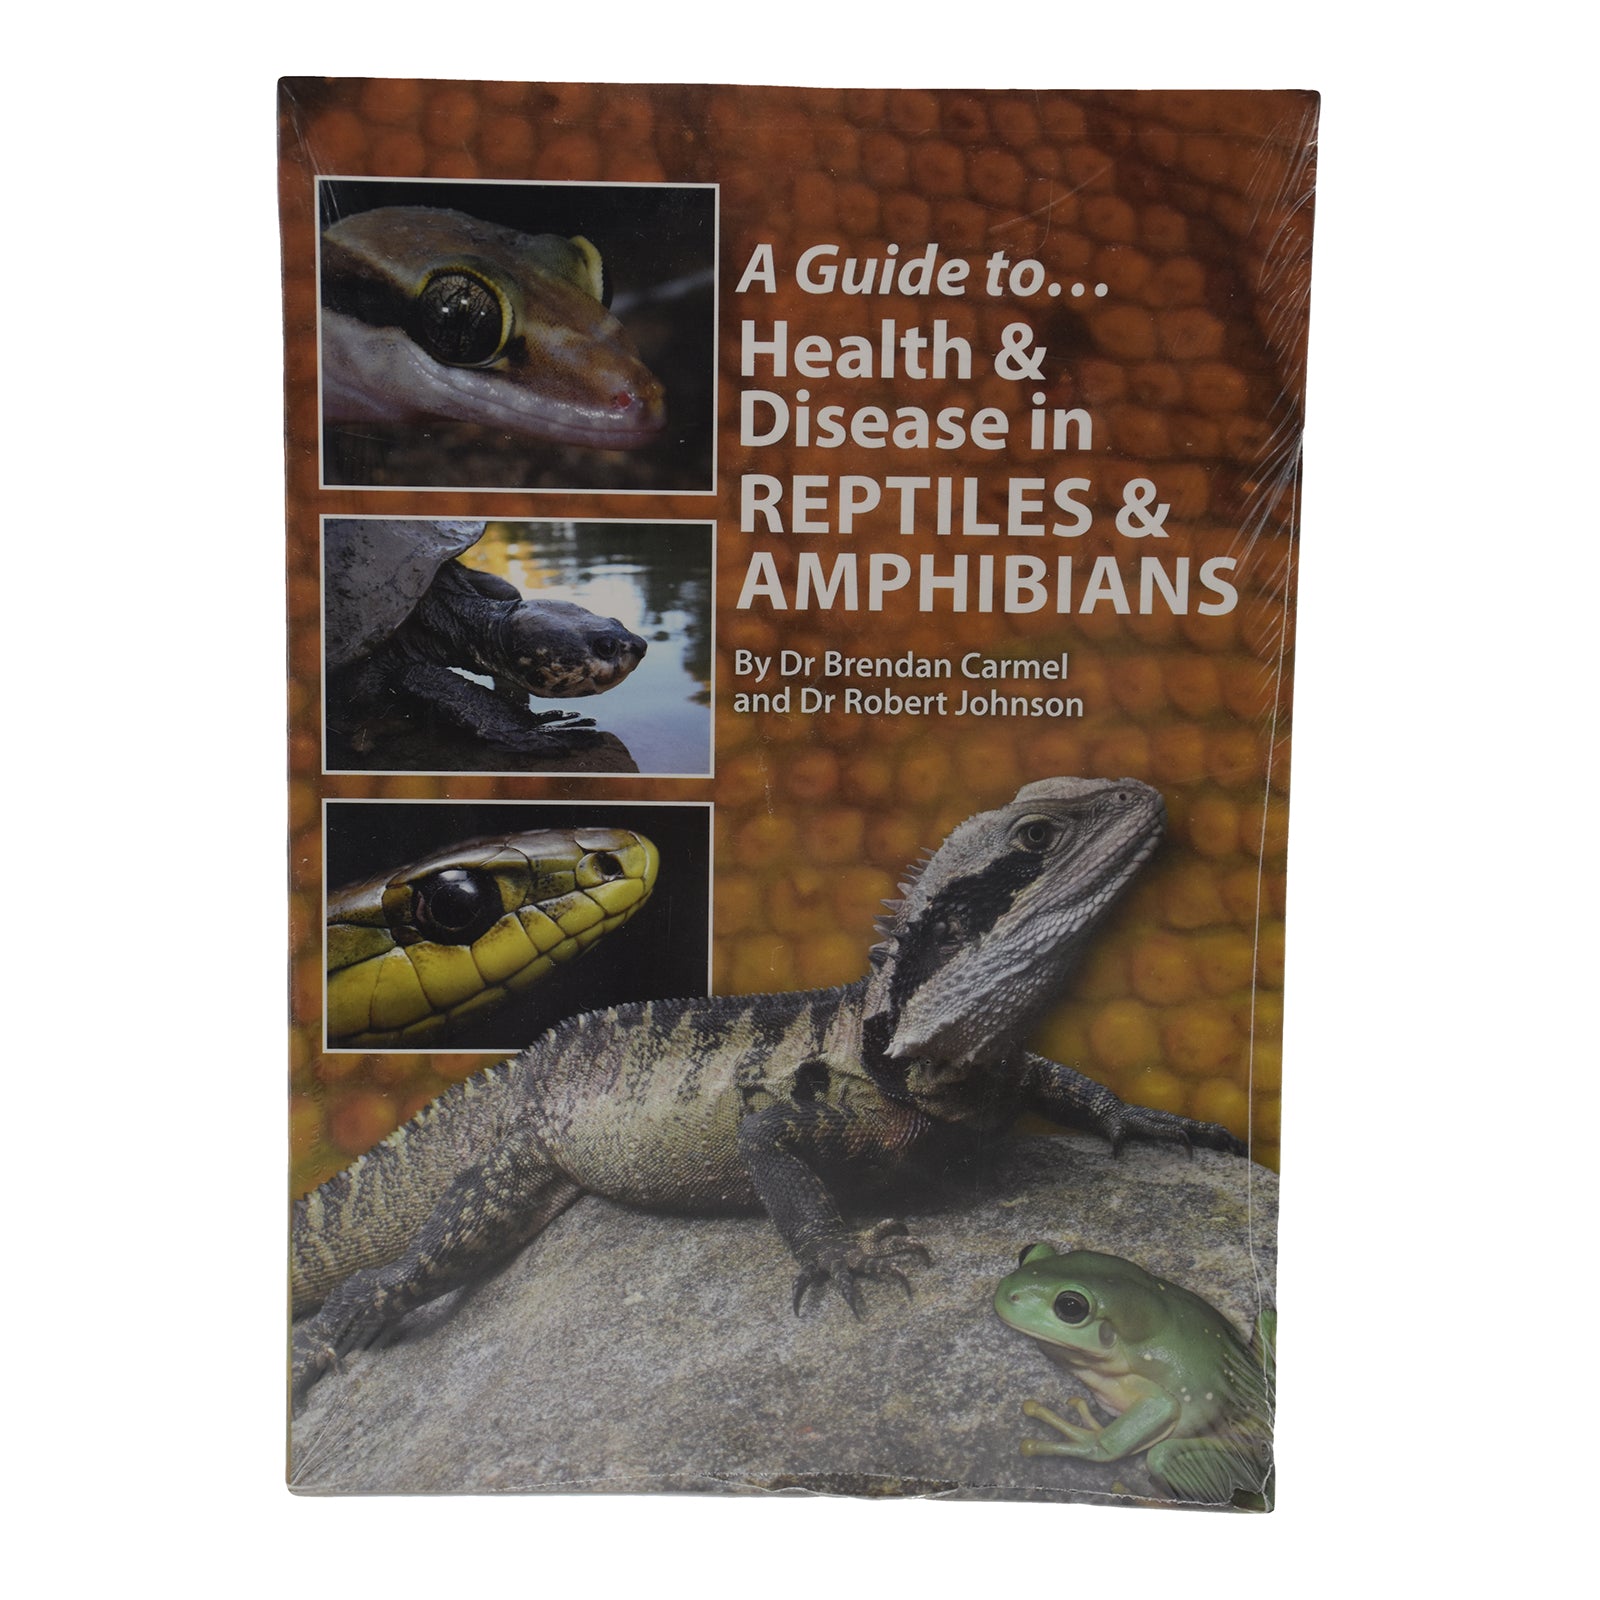 A Guide to Health & Disease in Reptiles & Amphibians